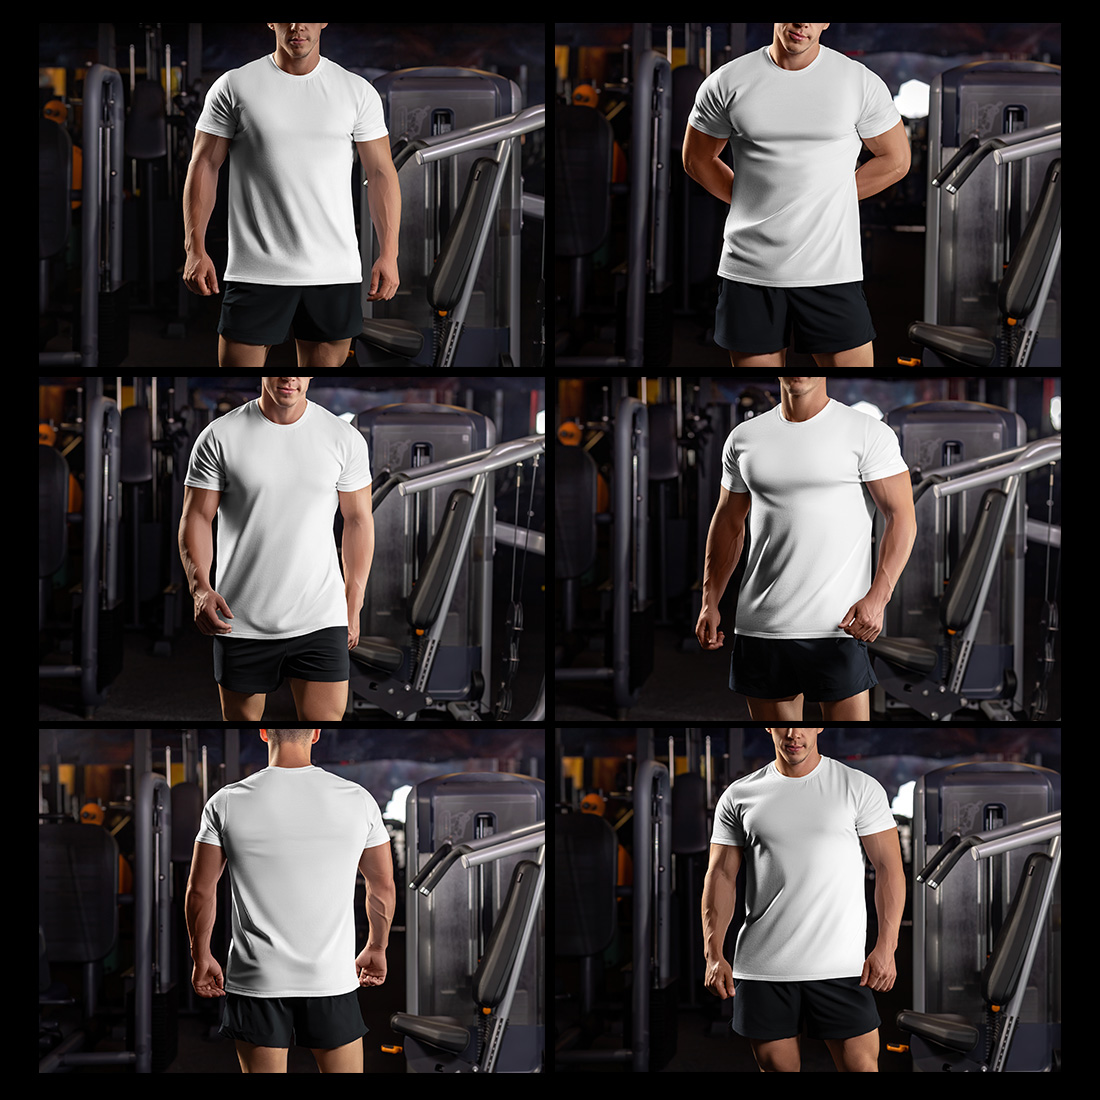 6 Mockups of the Men's T-shirt on the Bodybuilder in the Gym T-shirt with a Round Neck preview image.